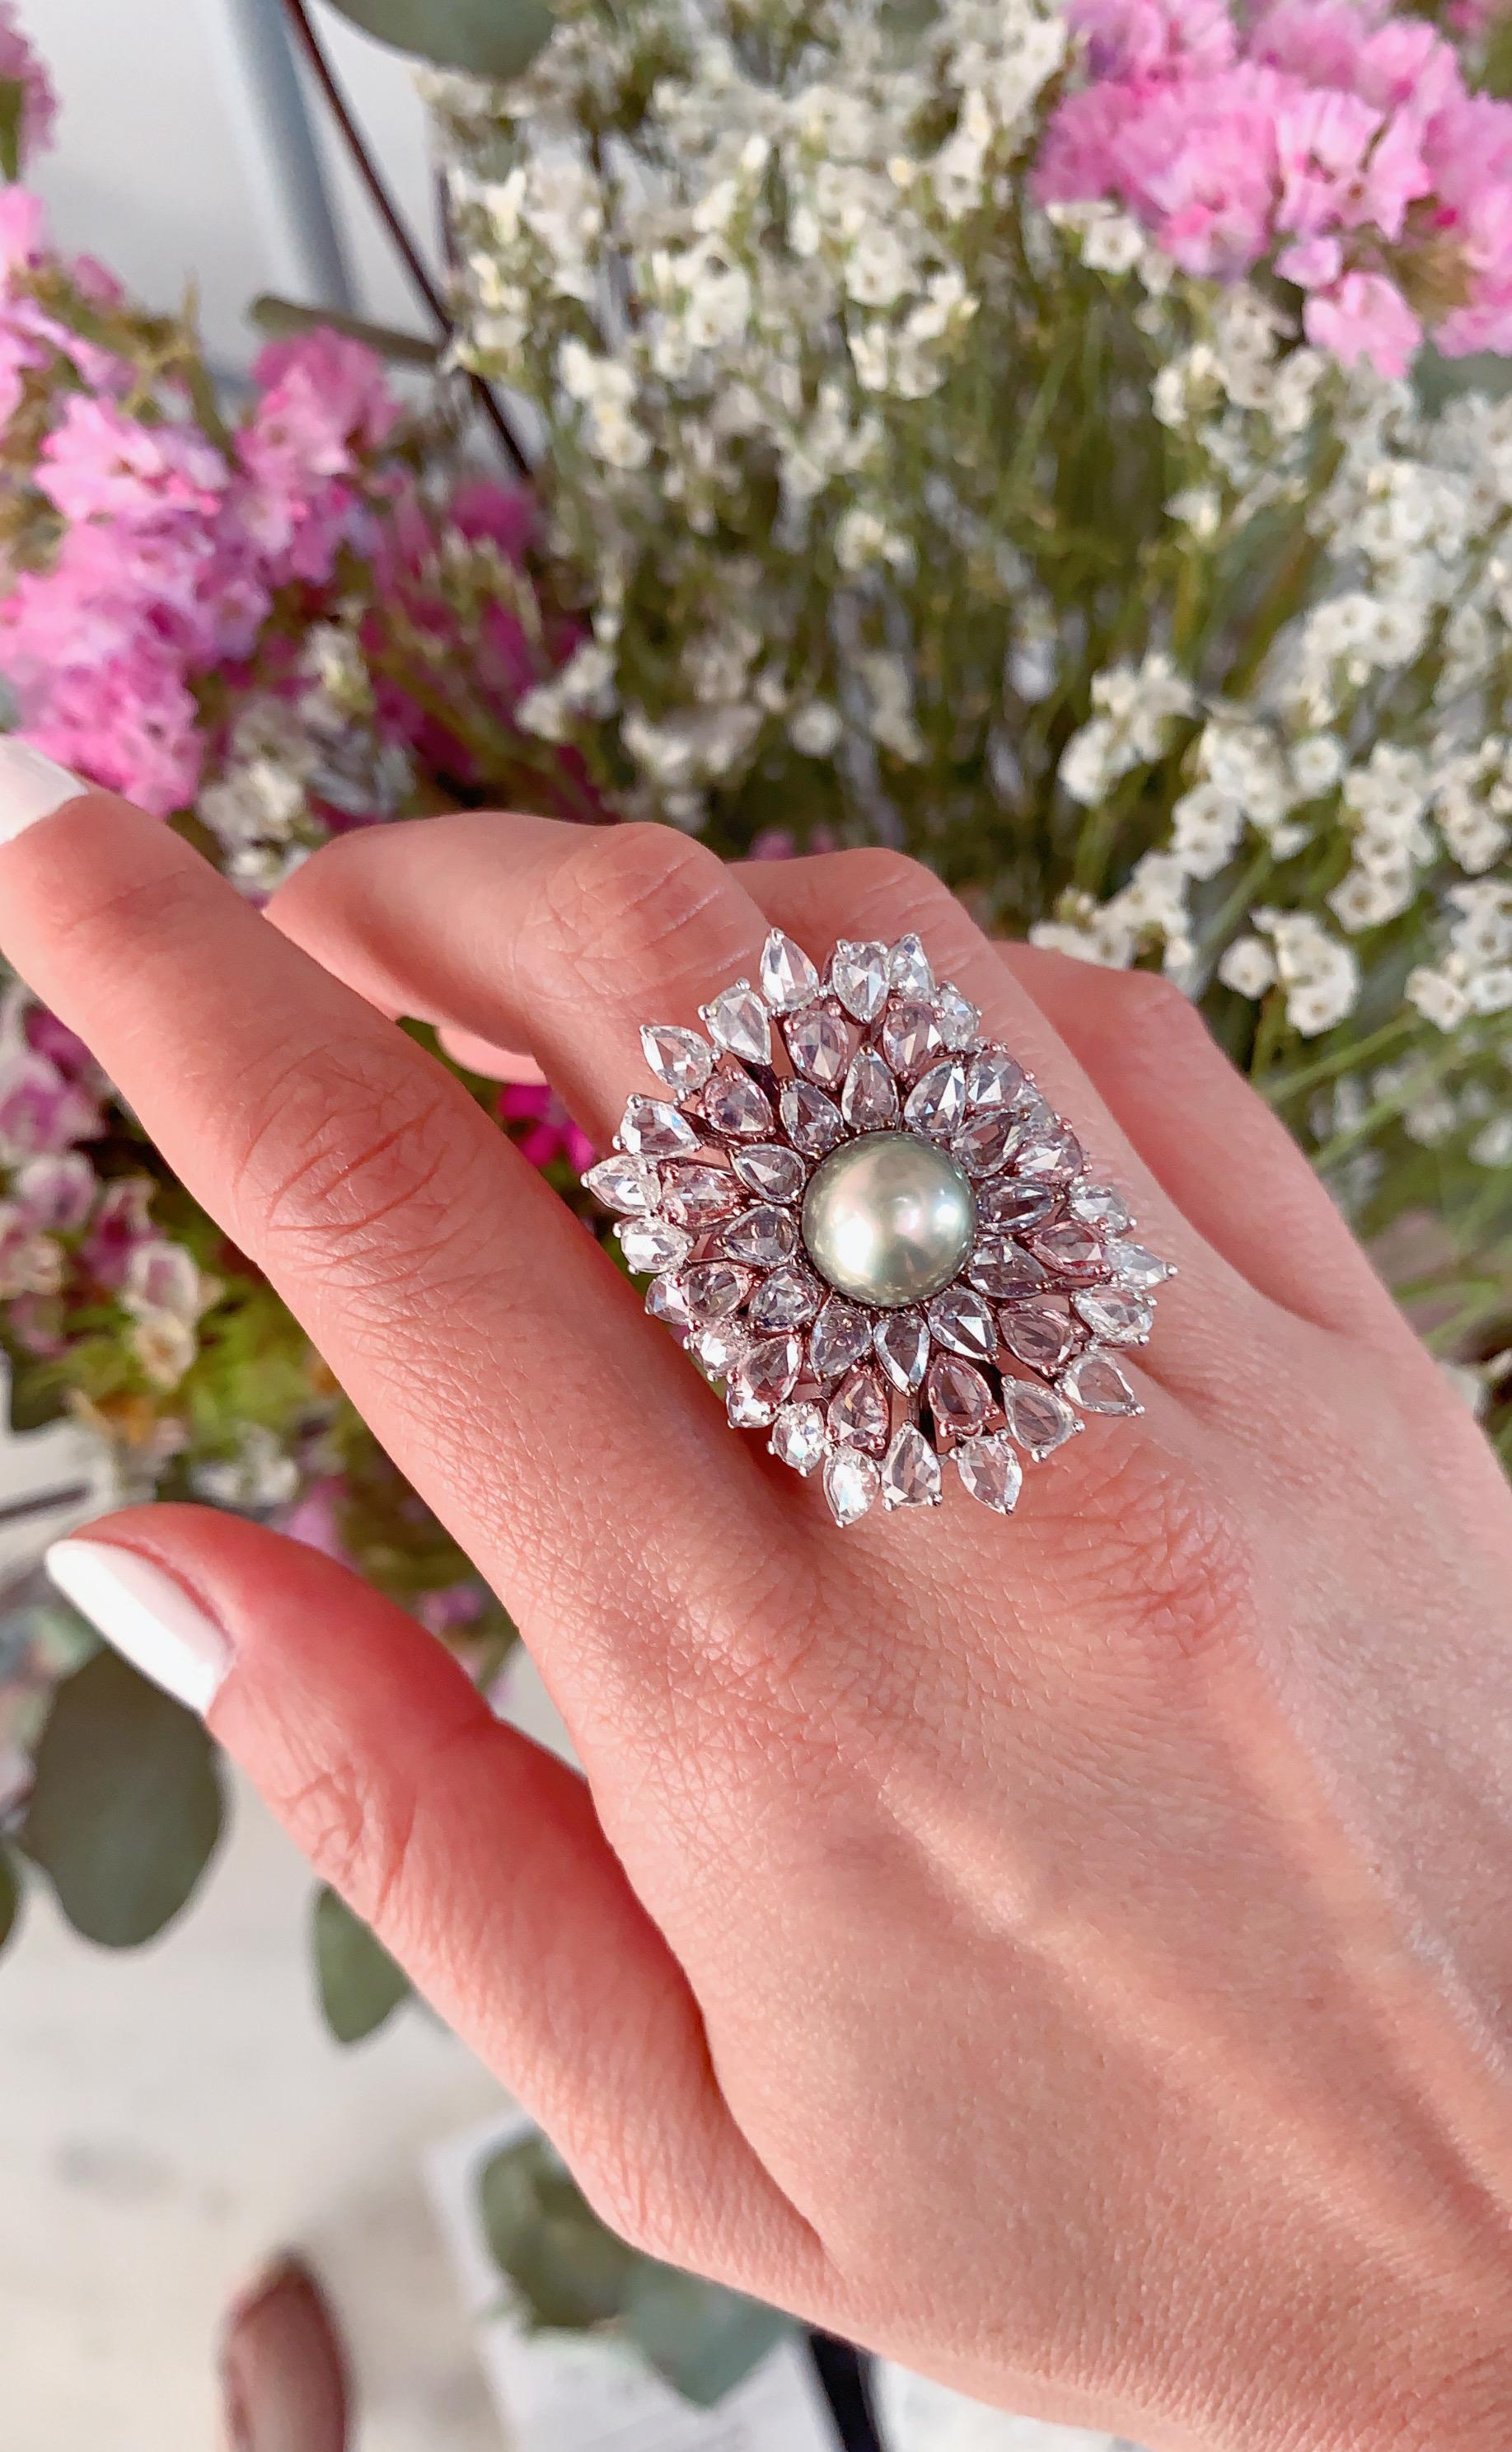 A Natural Pacific Pearl Ring with Rose Cut Diamonds set with PVD coated Gold as part of the Kaleidoscope Collection by Jewelry Designer, Sarah Ho.

This pearl was born from a rainbow-lipped pearl, to honour the kaleidoscope of colors that shimmer